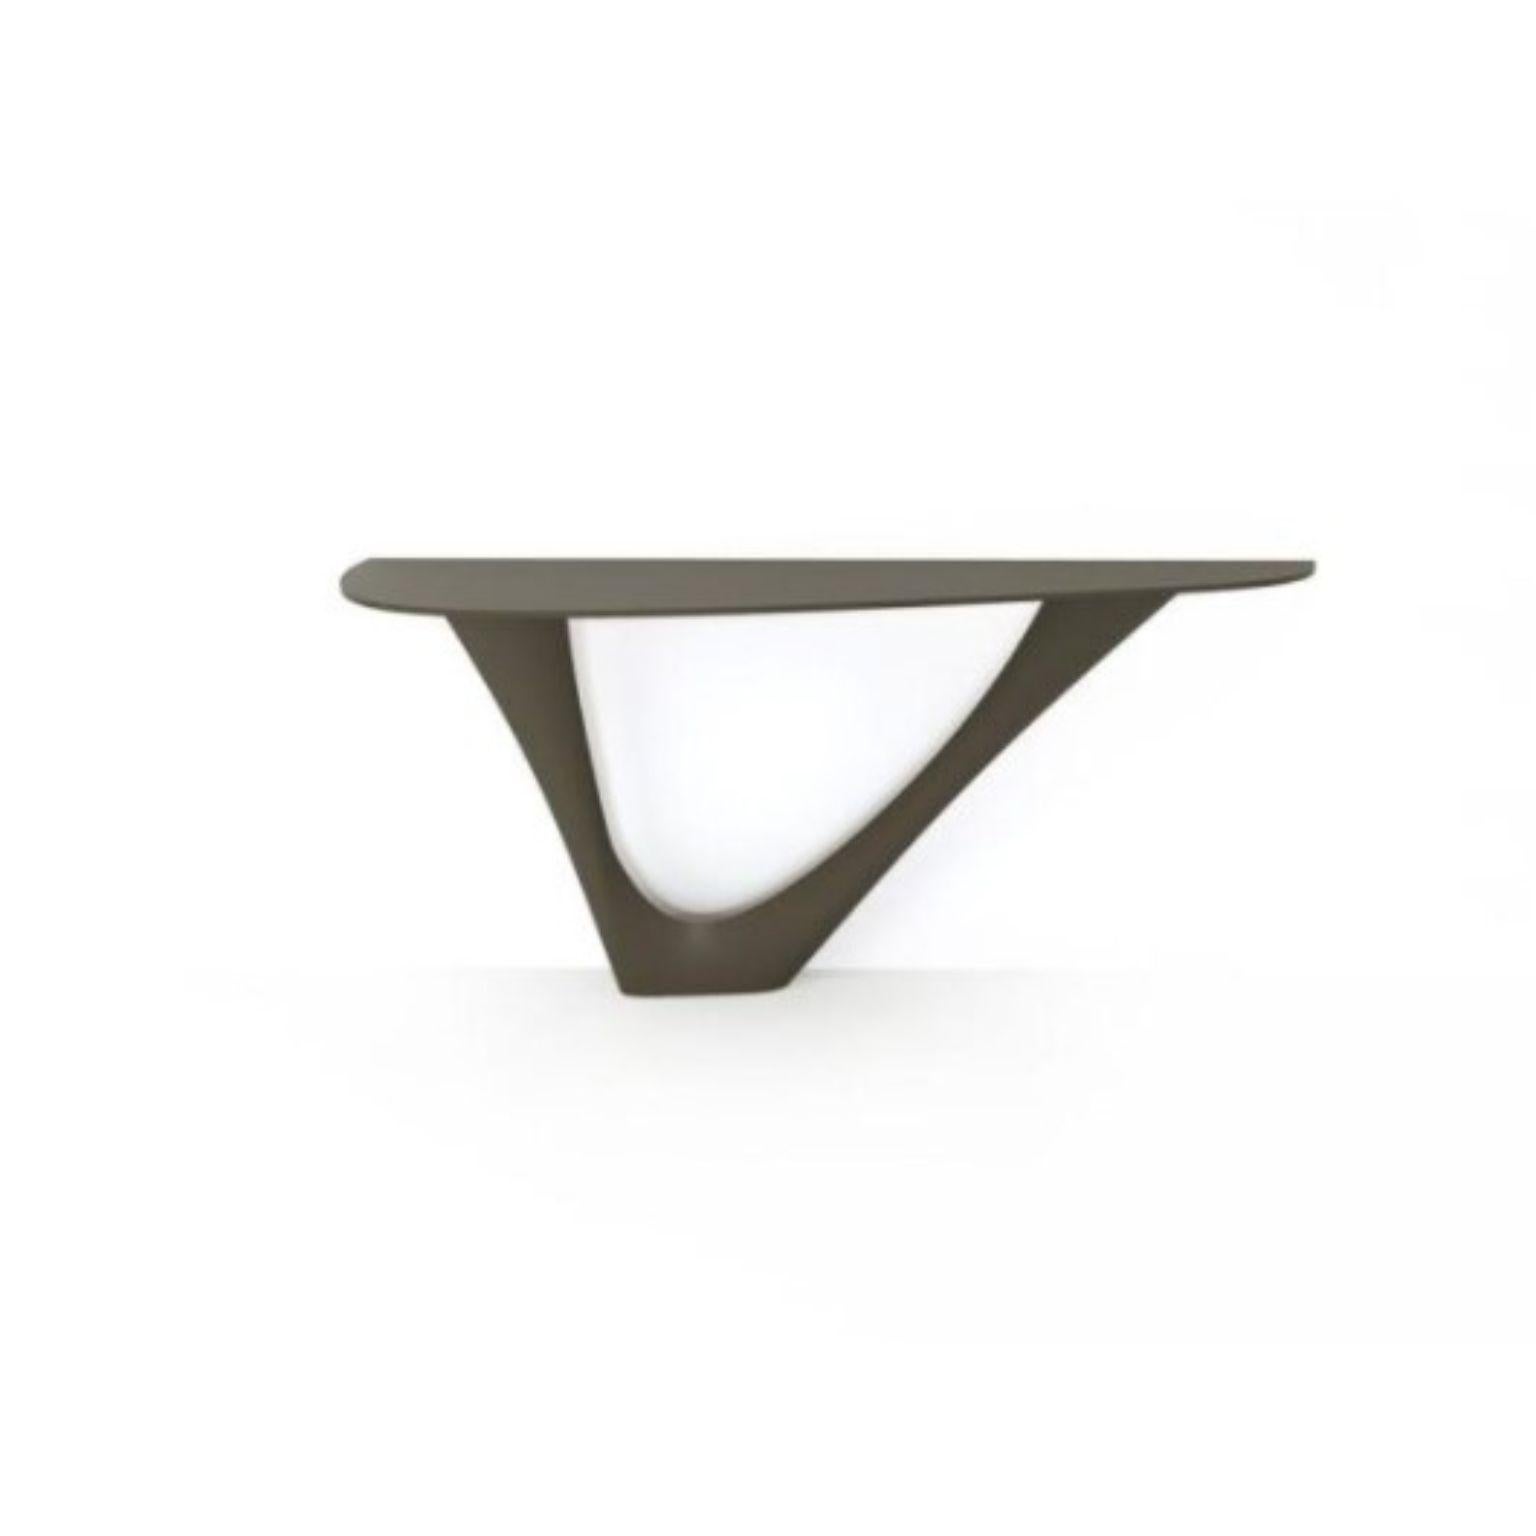 Umbra Grey G-Console steel base with steel top mono by Zieta
Dimensions: D 43 x W 159 x H 75 cm 
Material: Carbon steel. 
Also available in different colors and dimensions.

G-Console is another bionic object in our collection. Created for smaller